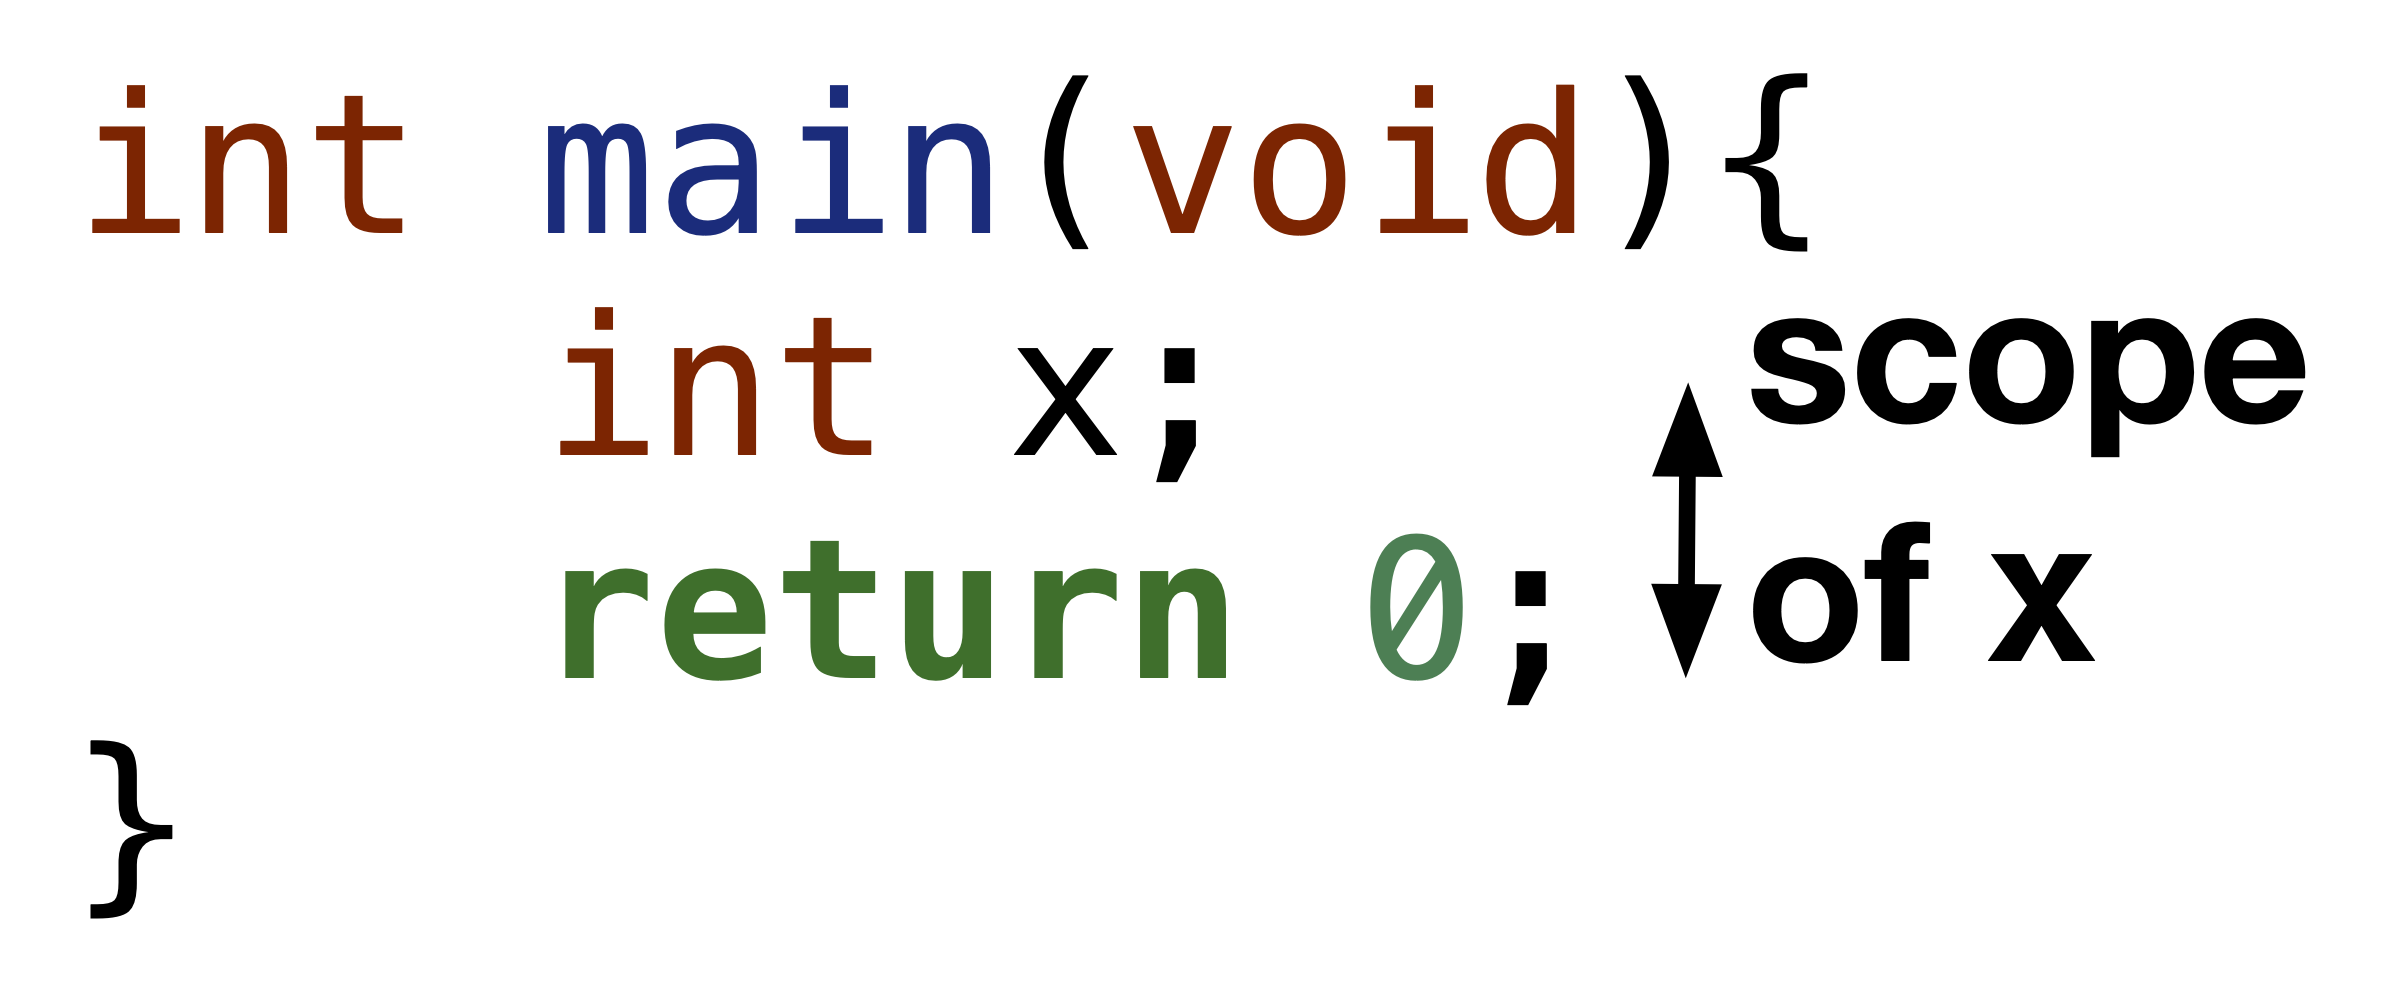 Scope of x and y in function func.